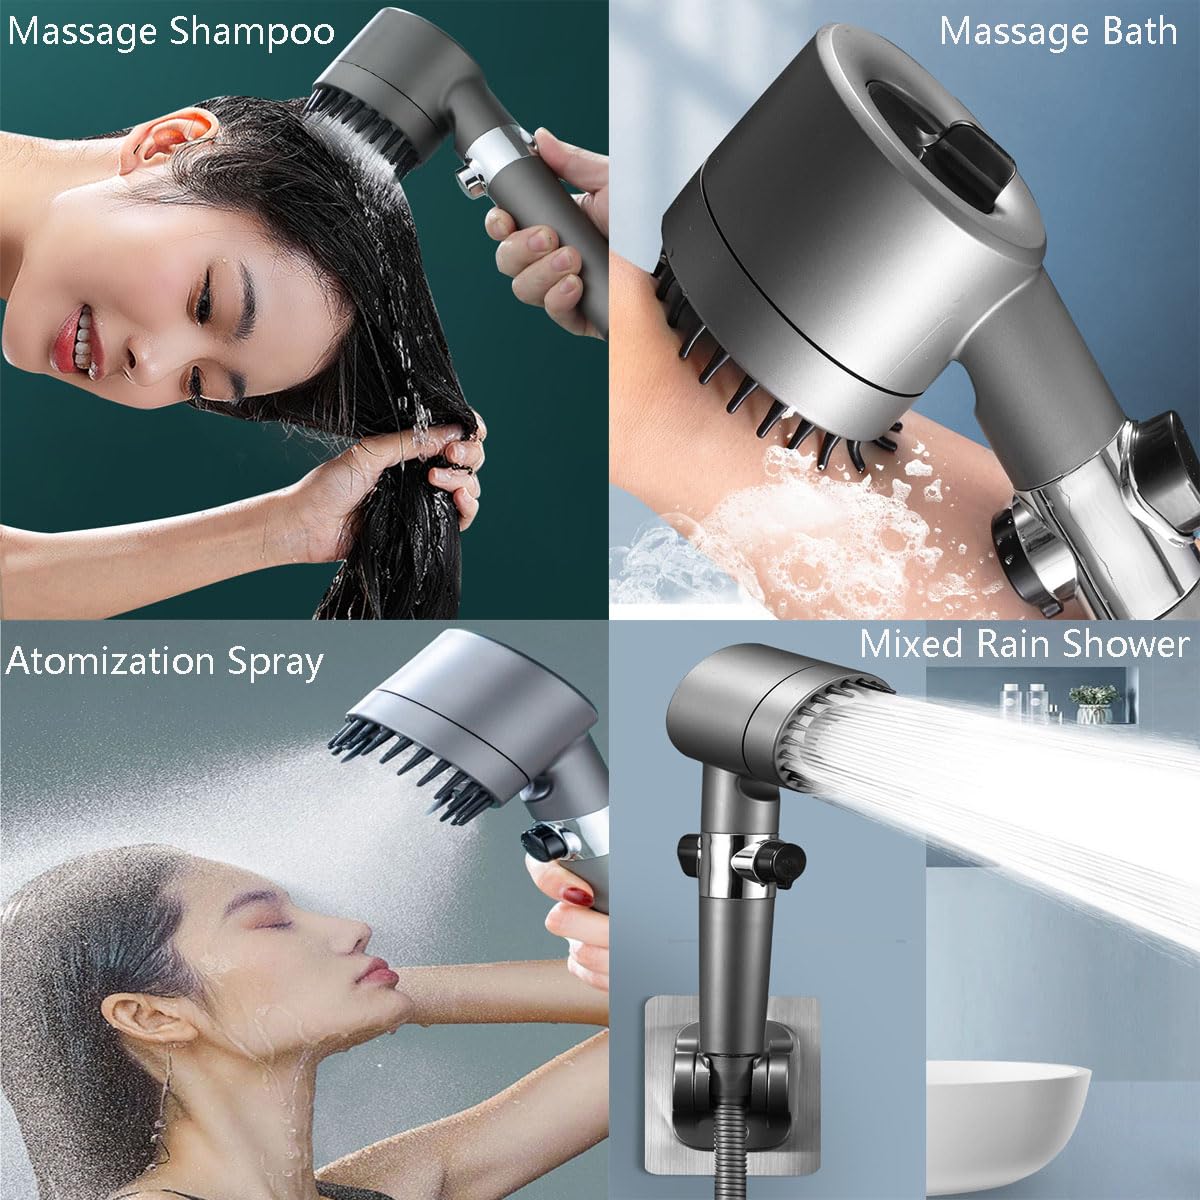 Handheld Shower Head with Filter, High Pressure 3 Spray Mode Showerhead with Switch, High Pressure Shower Head with Brush for Massaging The Scalp-International 4-Point Interface.